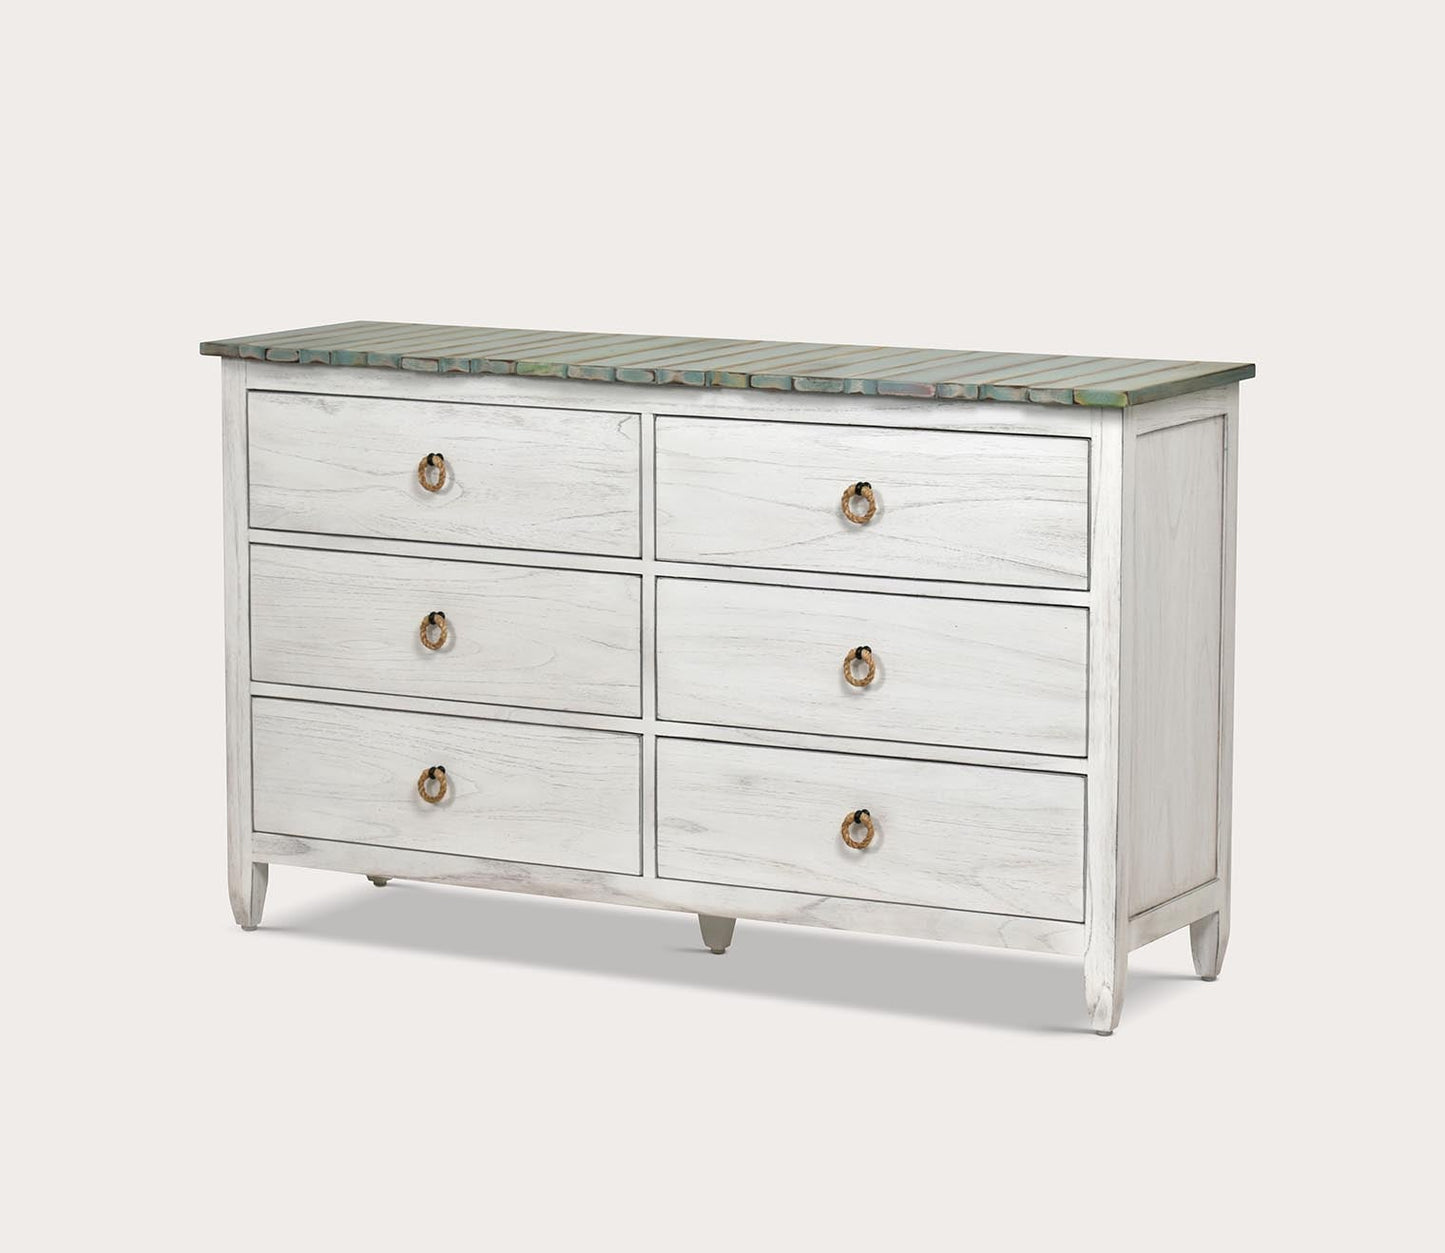 Picket Fence 6-Drawer Solid Wood Dresser - FLOOR SAMPLE by Sea Winds Trading